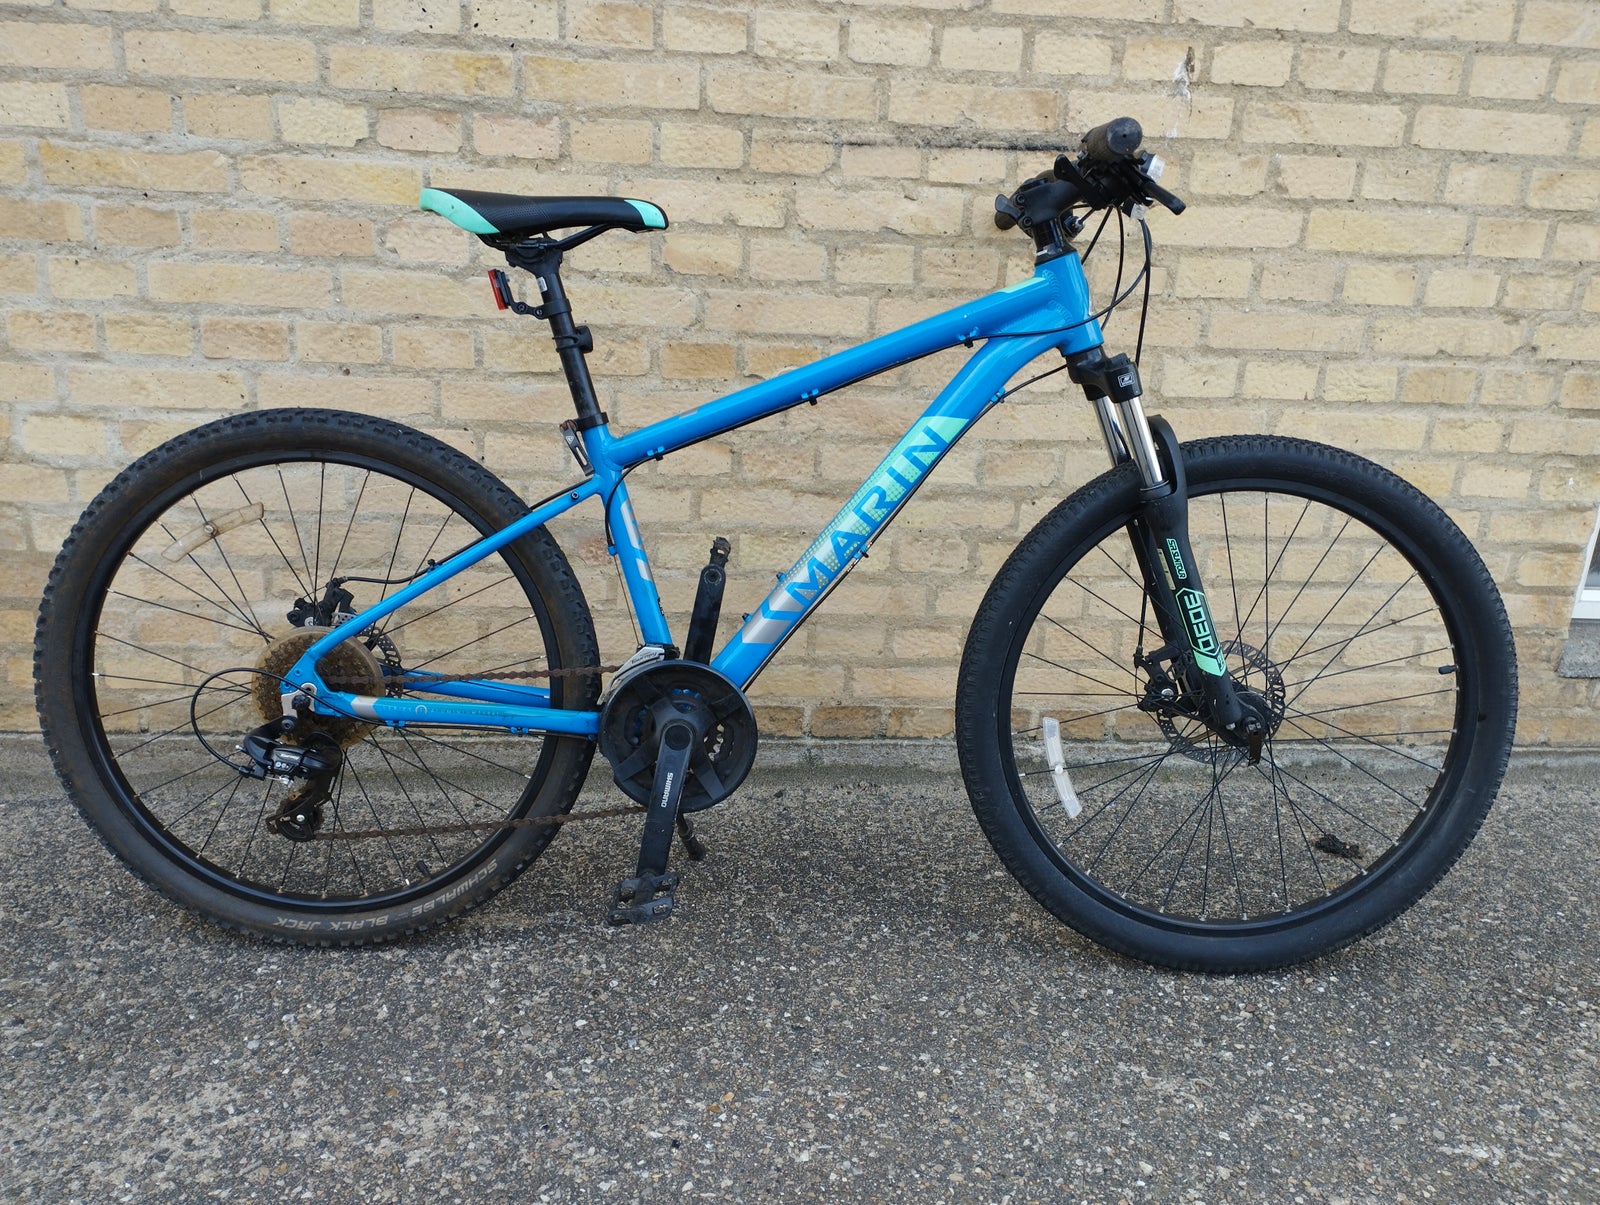 Marin, anden mountainbike, 26 tommer